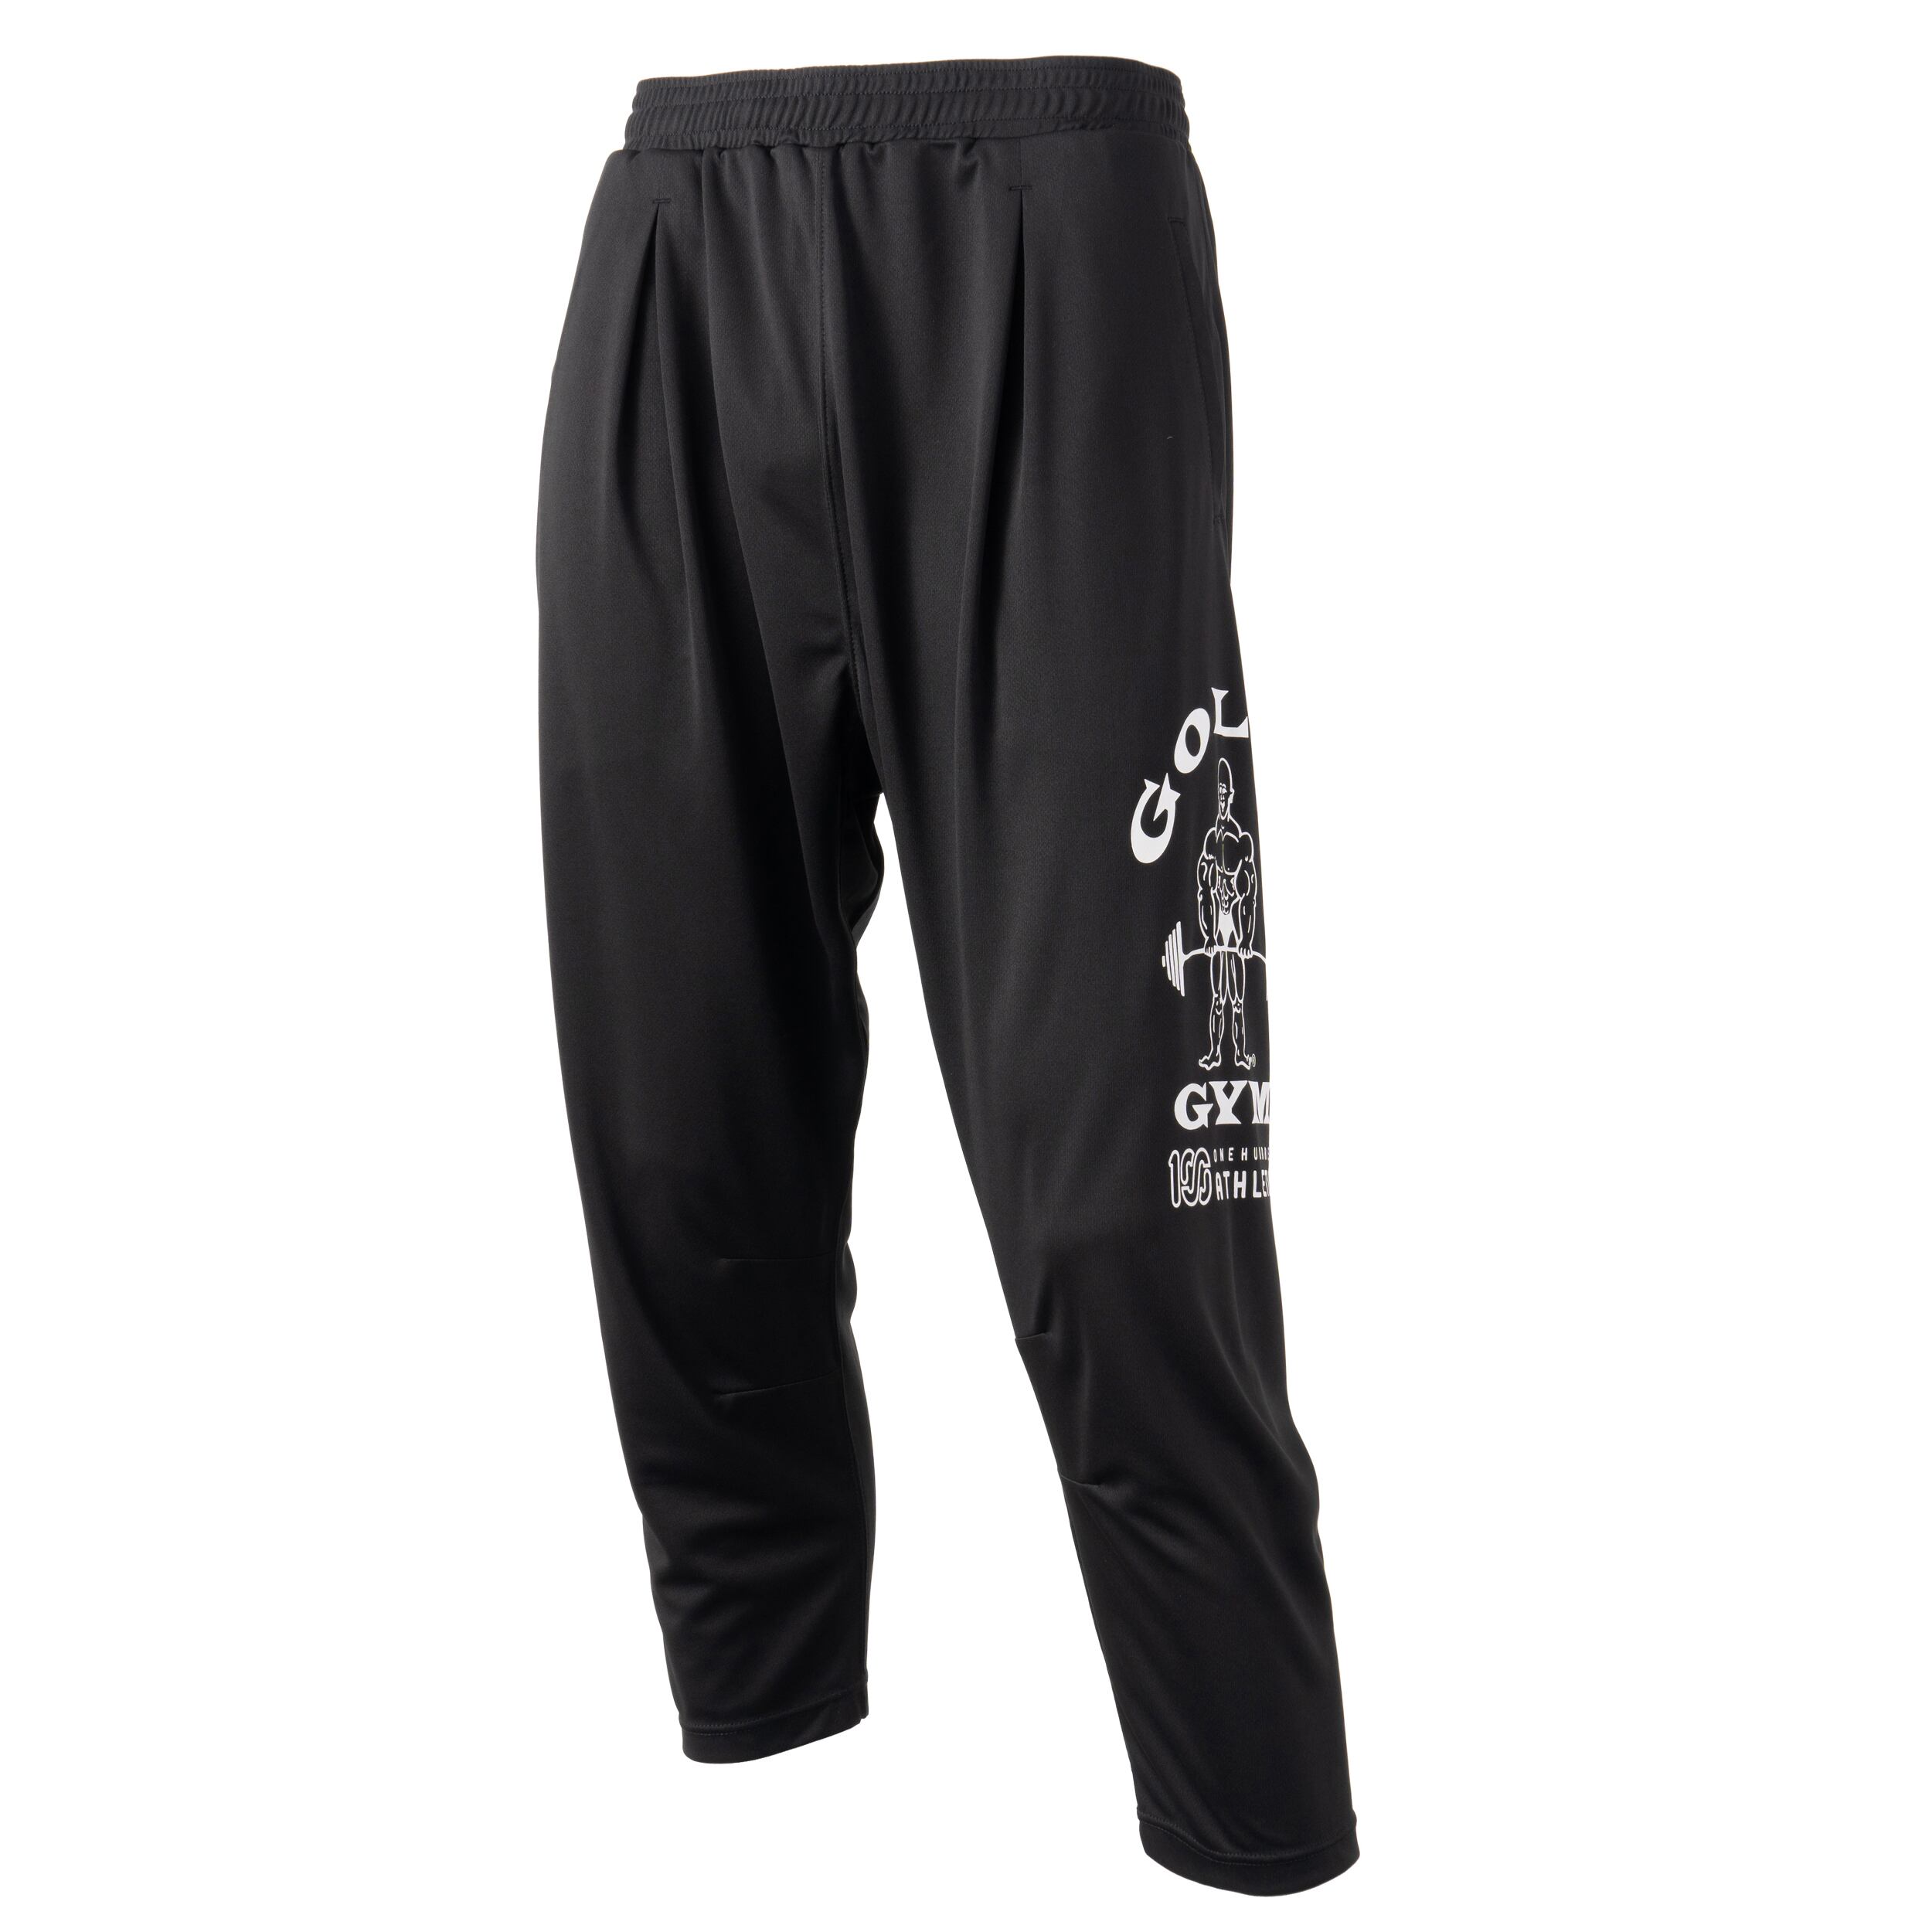 GG x 100A DRY BAGGY PANTS | 100A ONLINE STORE